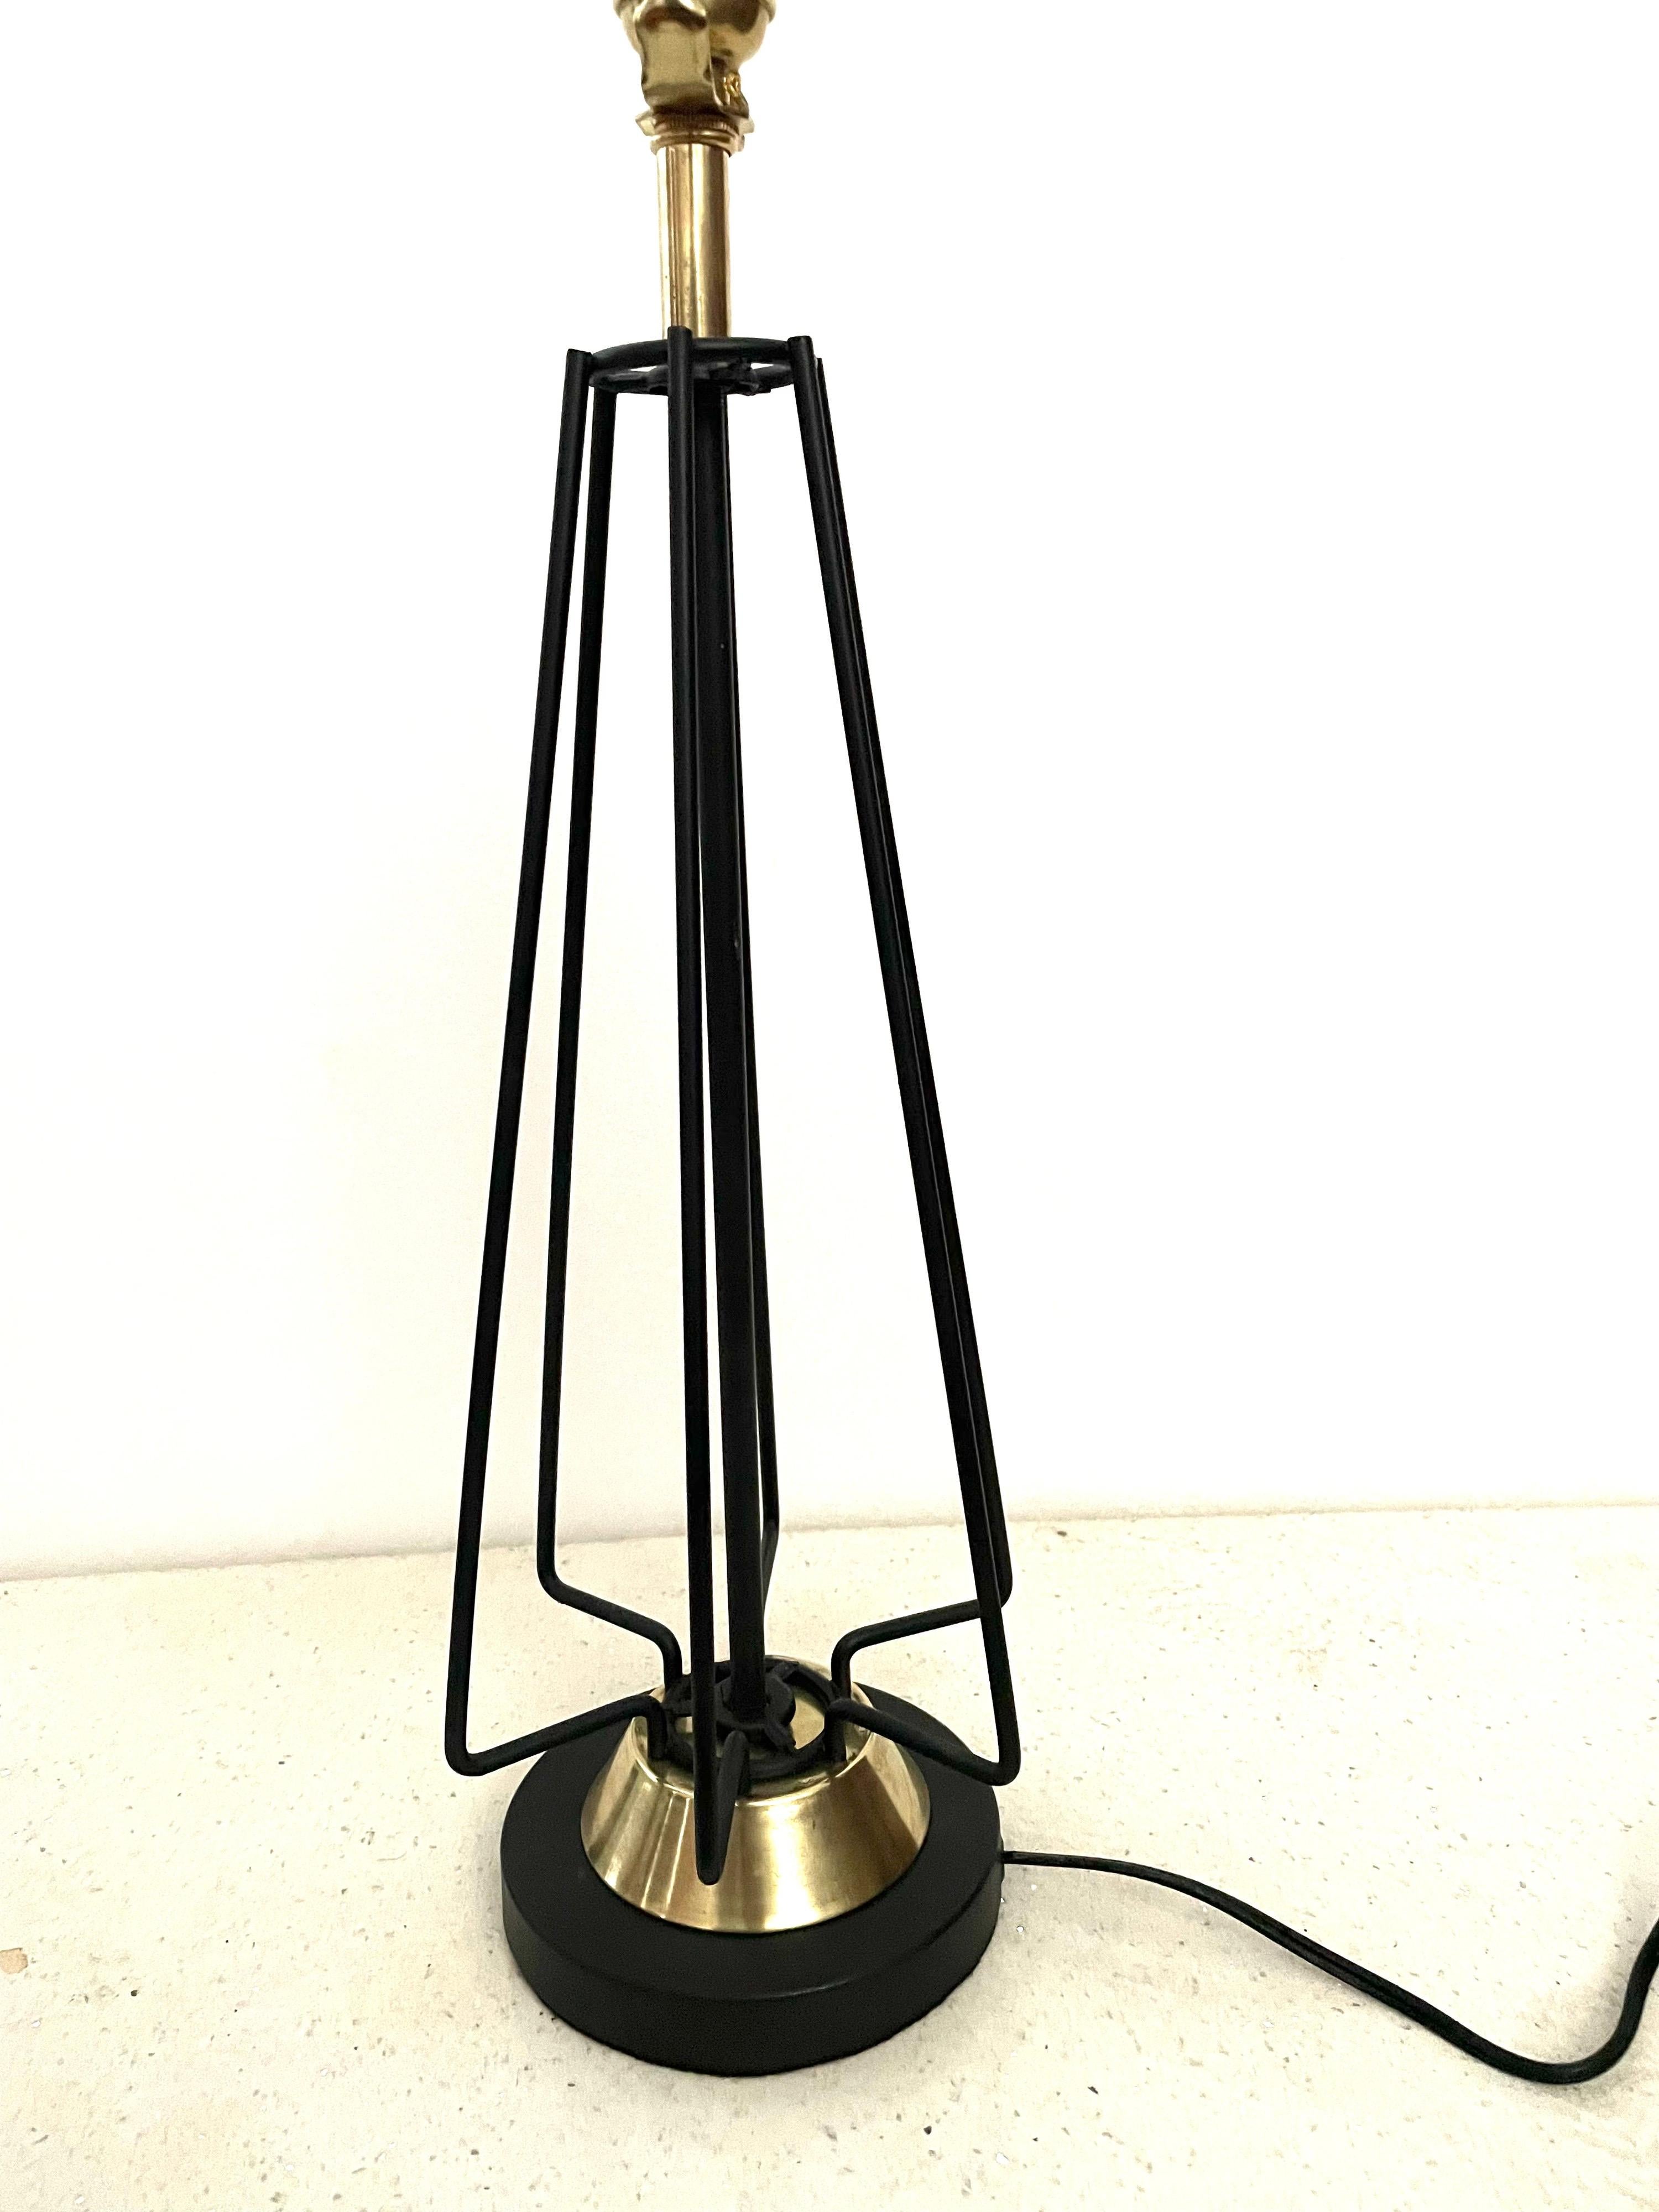 American Mid-Century Modern Atomic Age Brass and Metal Lamp 1